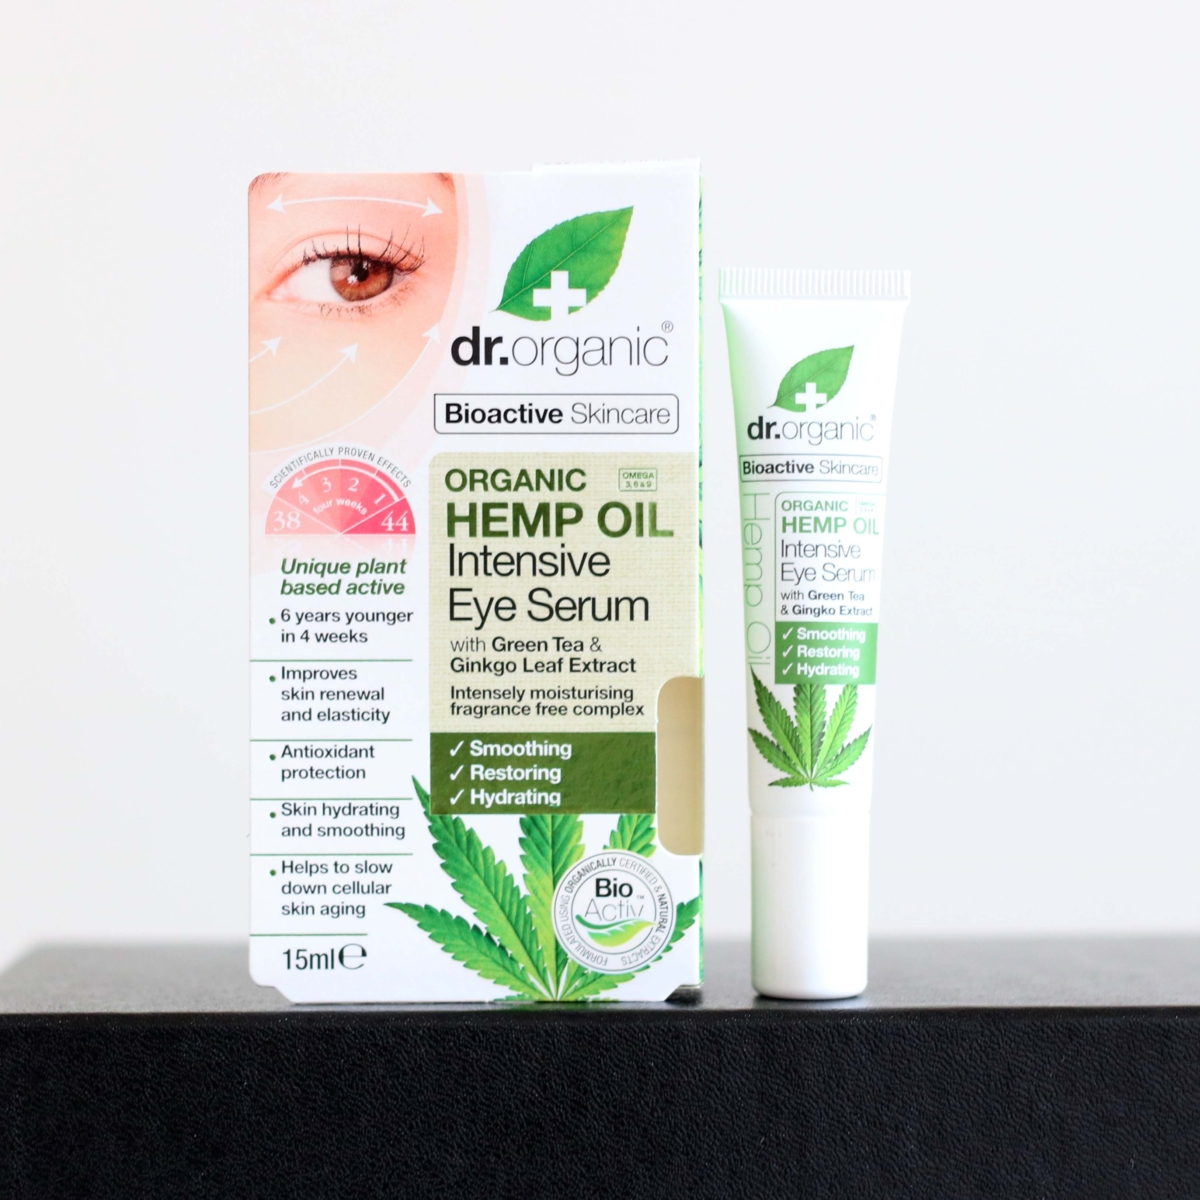 Latest in Beauty Build Your Own Box Review - Dr Organic Hemp Oil Intensive Eye Serum